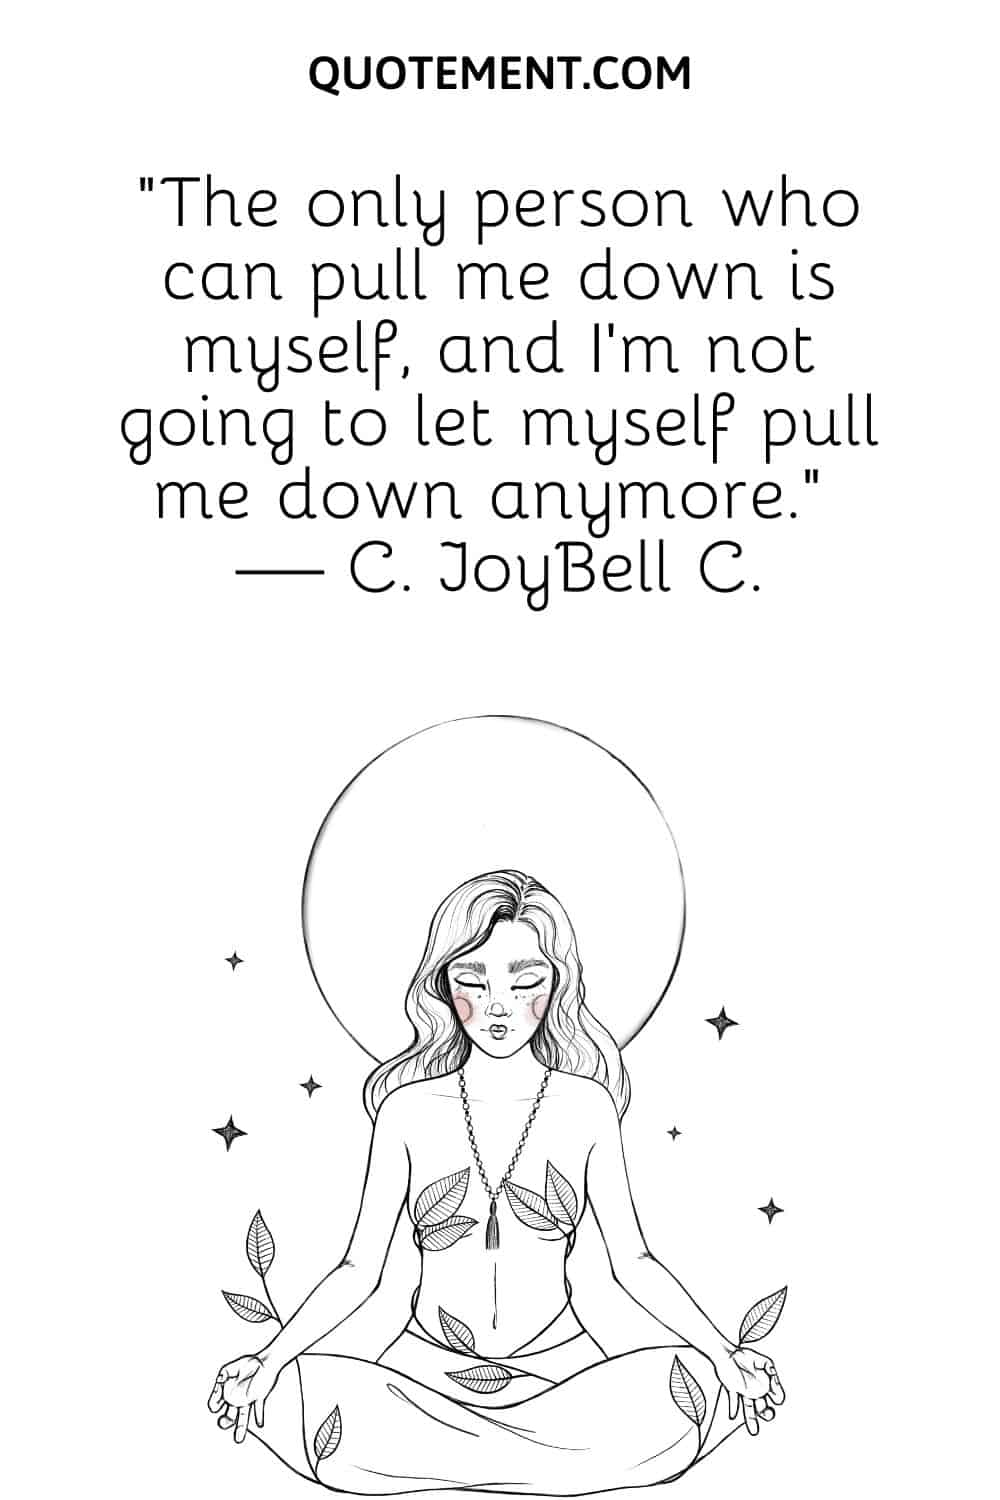 The only person who can pull me down is myself, and I'm not going to let myself pull me down anymore.